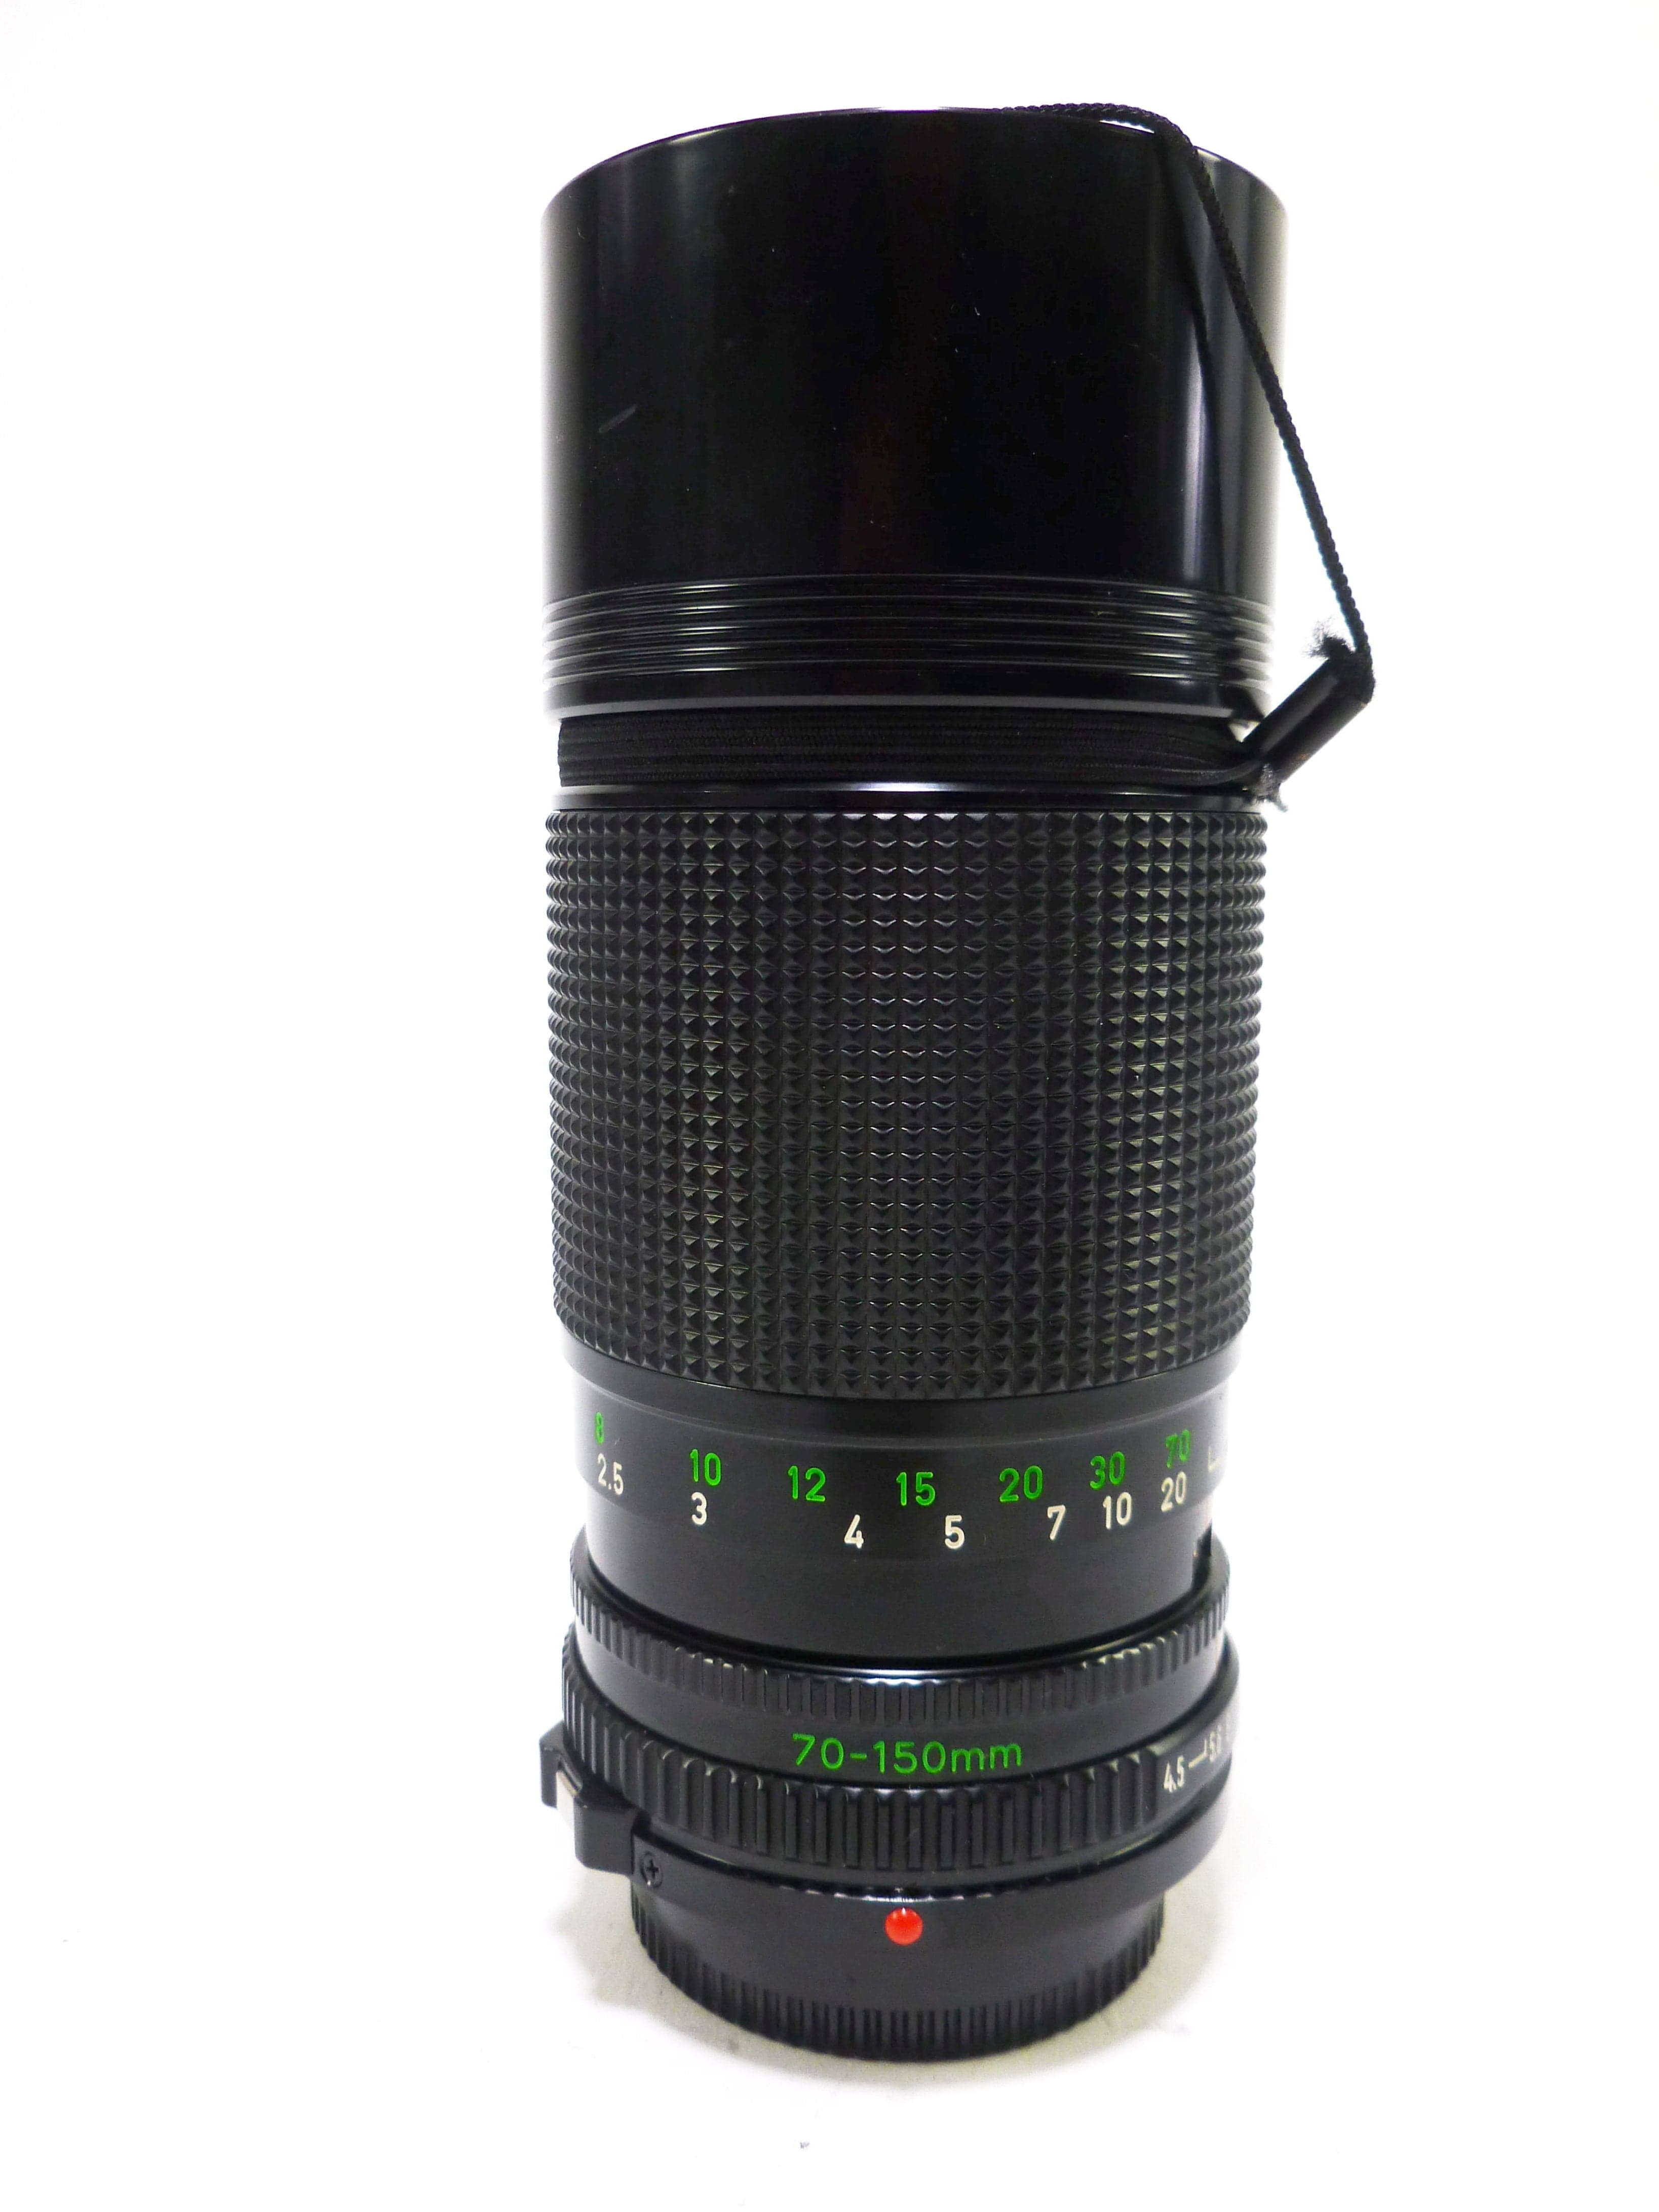 Canon FD 70-150mm f/4.5 Zoom Lens